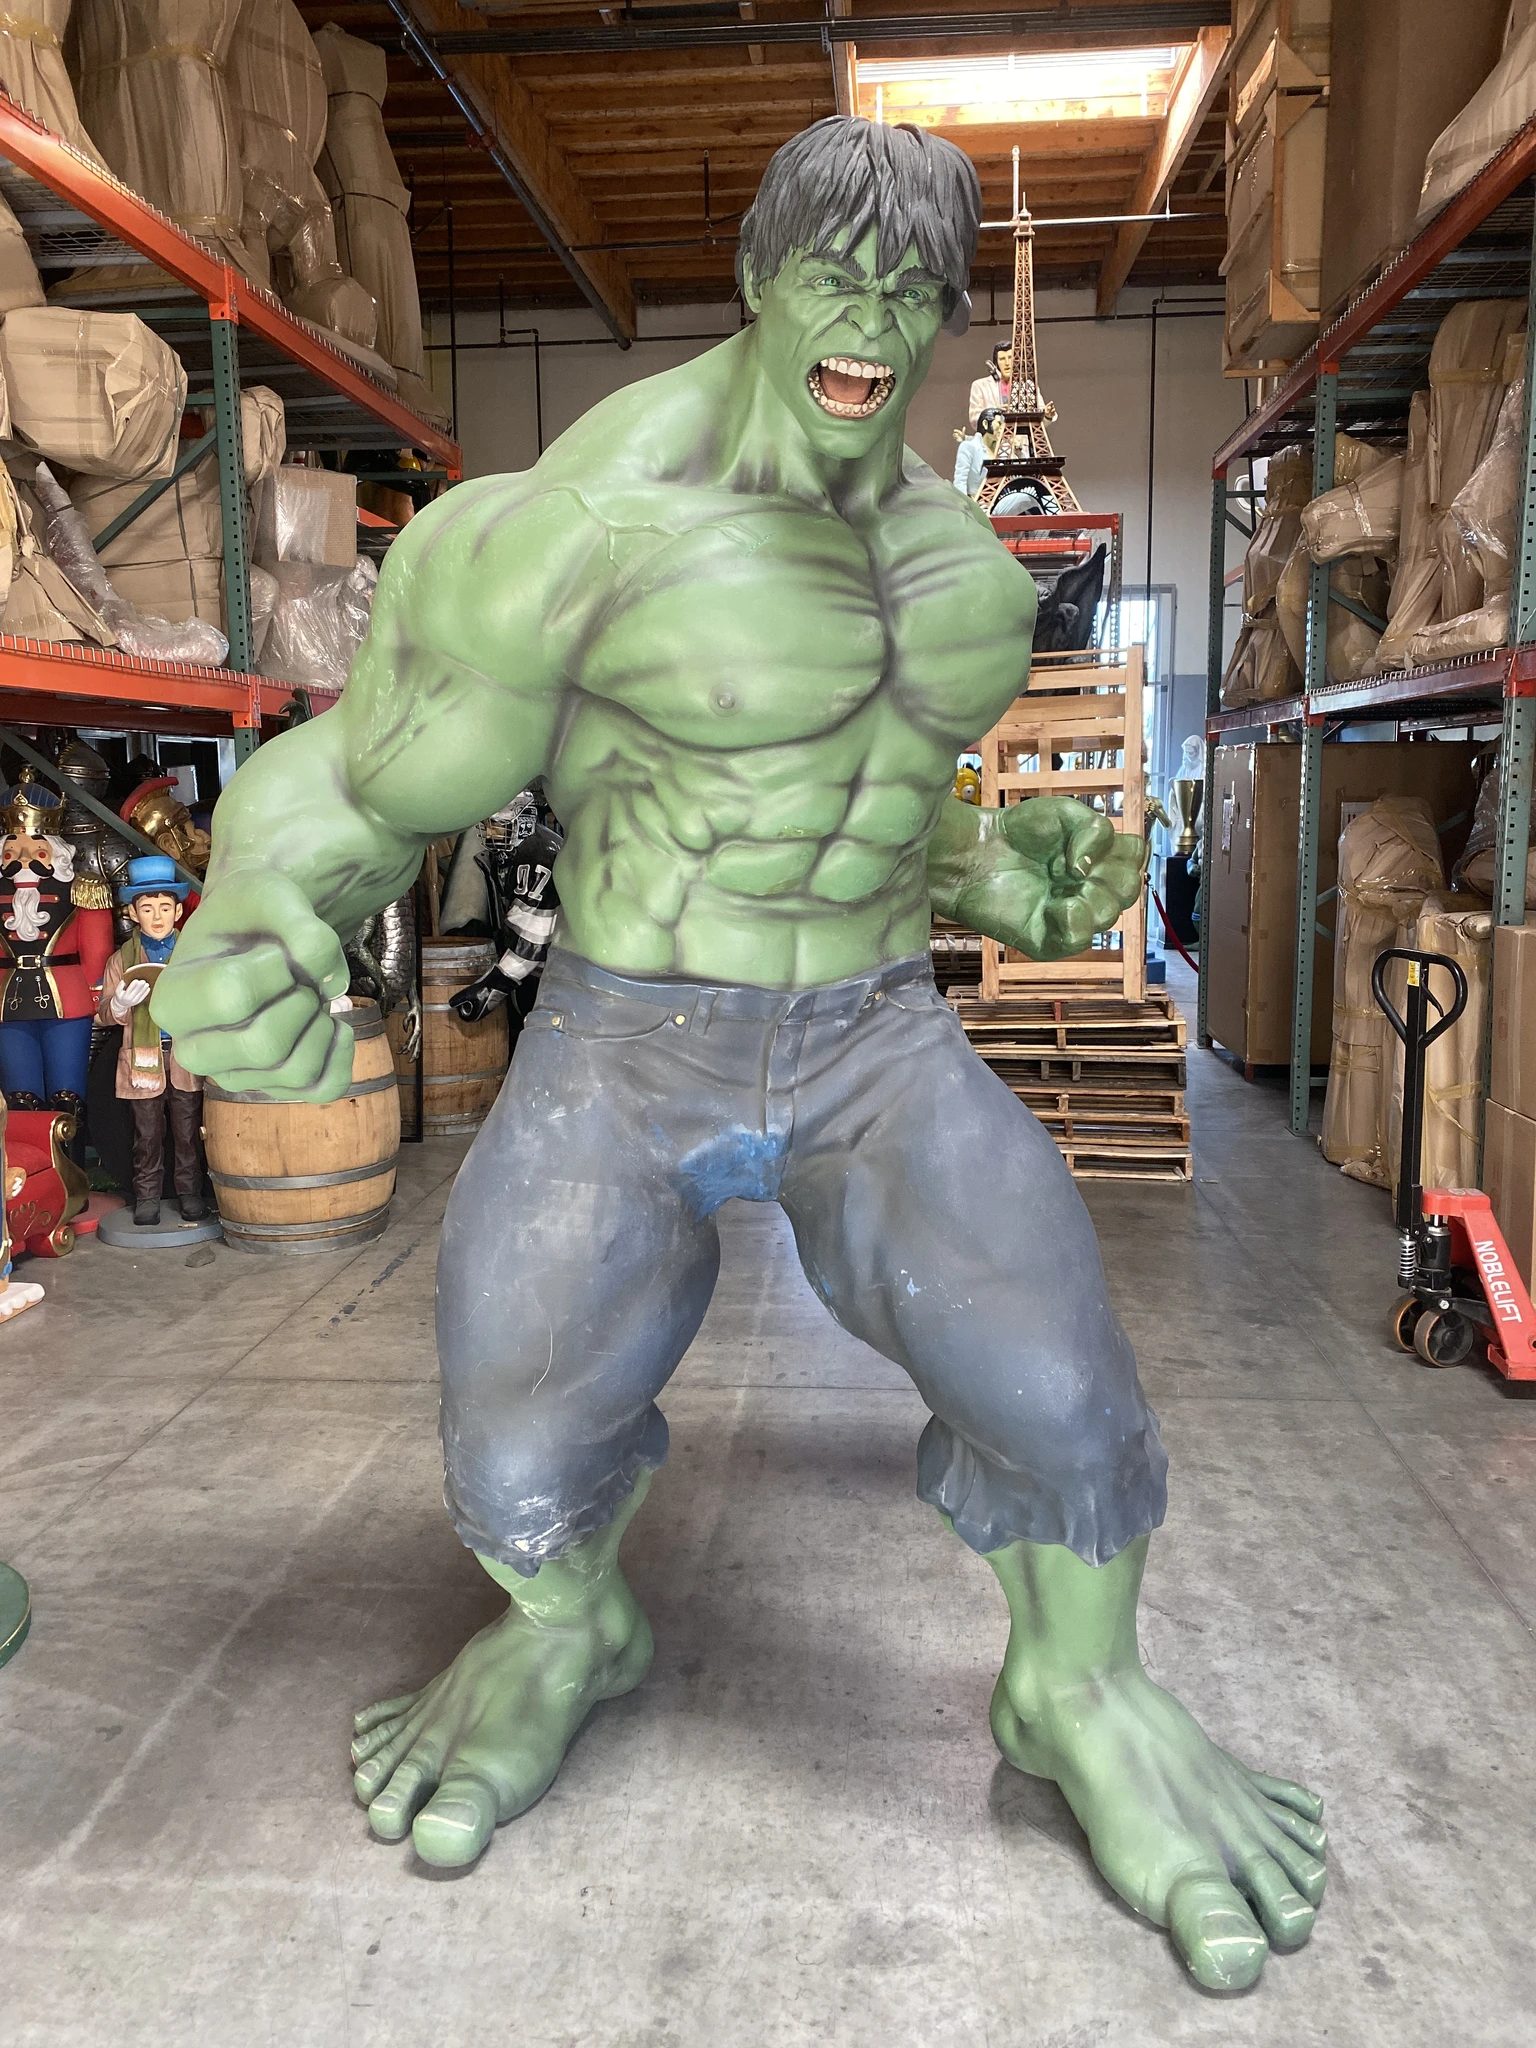 10 Best Life Size Hulk Statues For Hulk Lovers To Buy In 2021